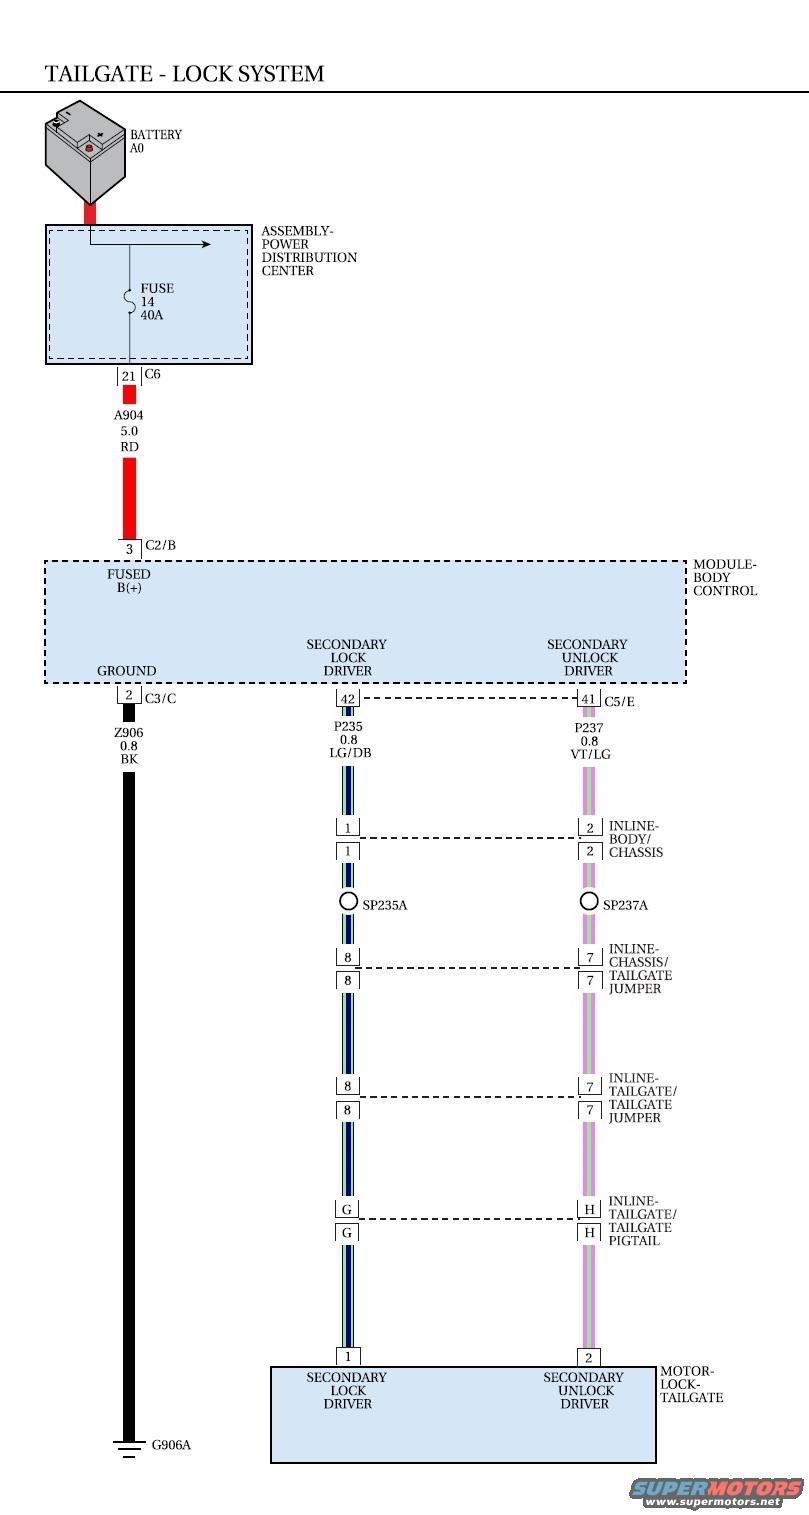 Wiring Diagram For Dodge Ram 1500 from www.supermotors.net